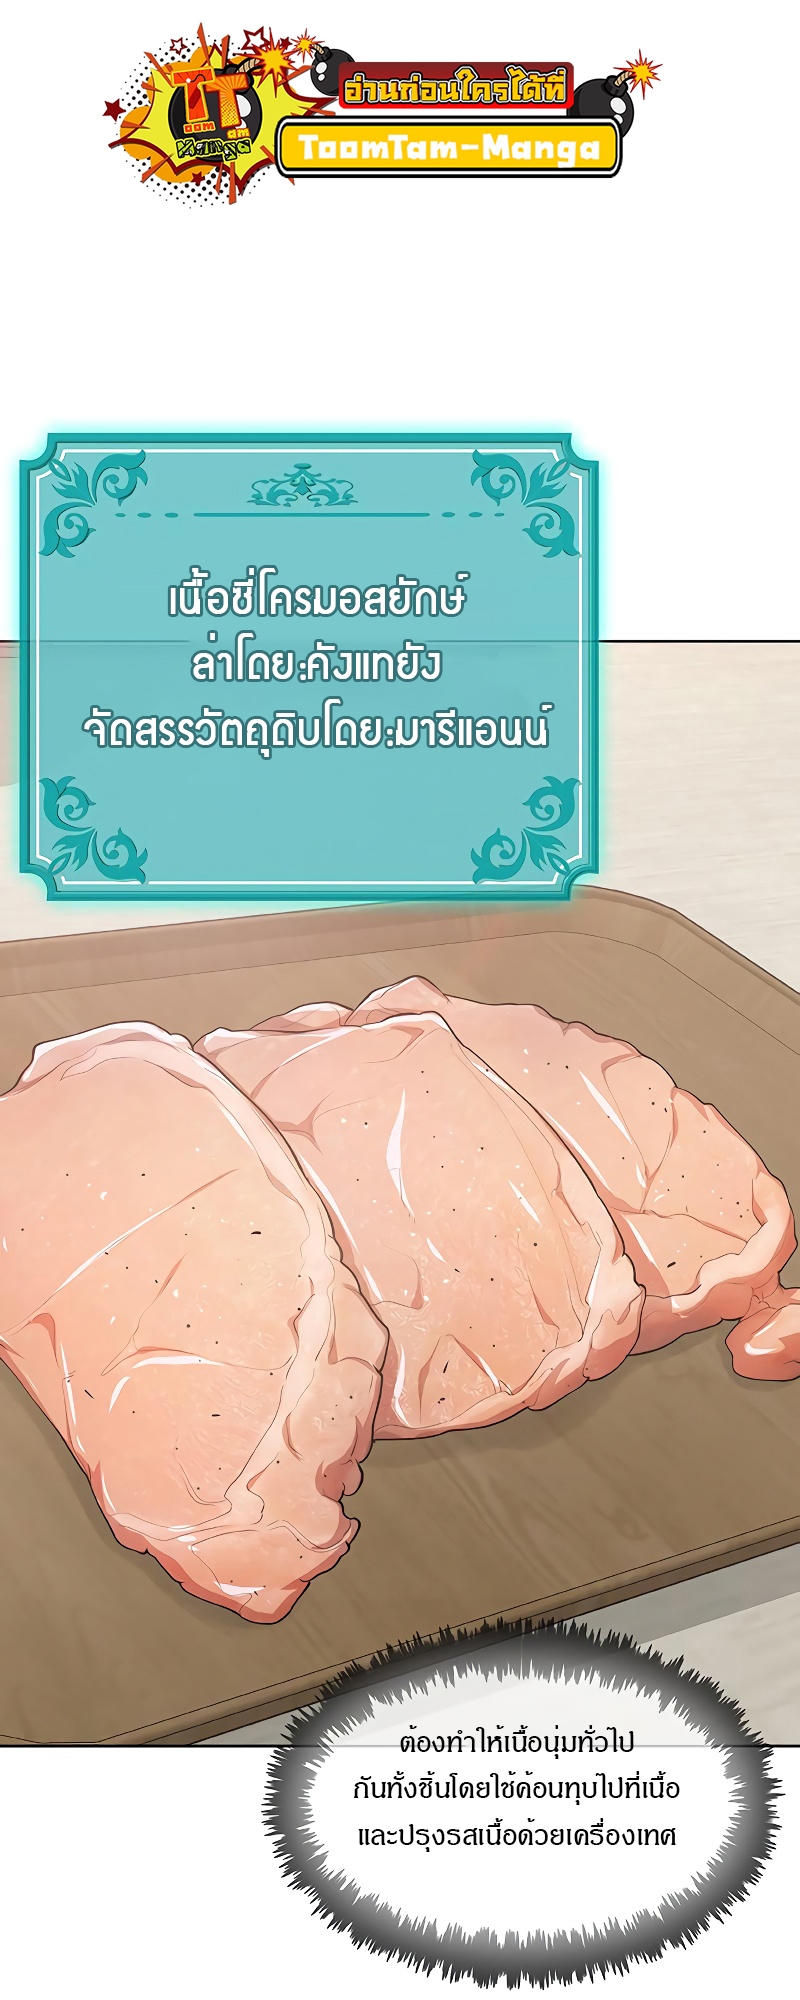 The Strongest Chef in Another World 12 16 04 25670052